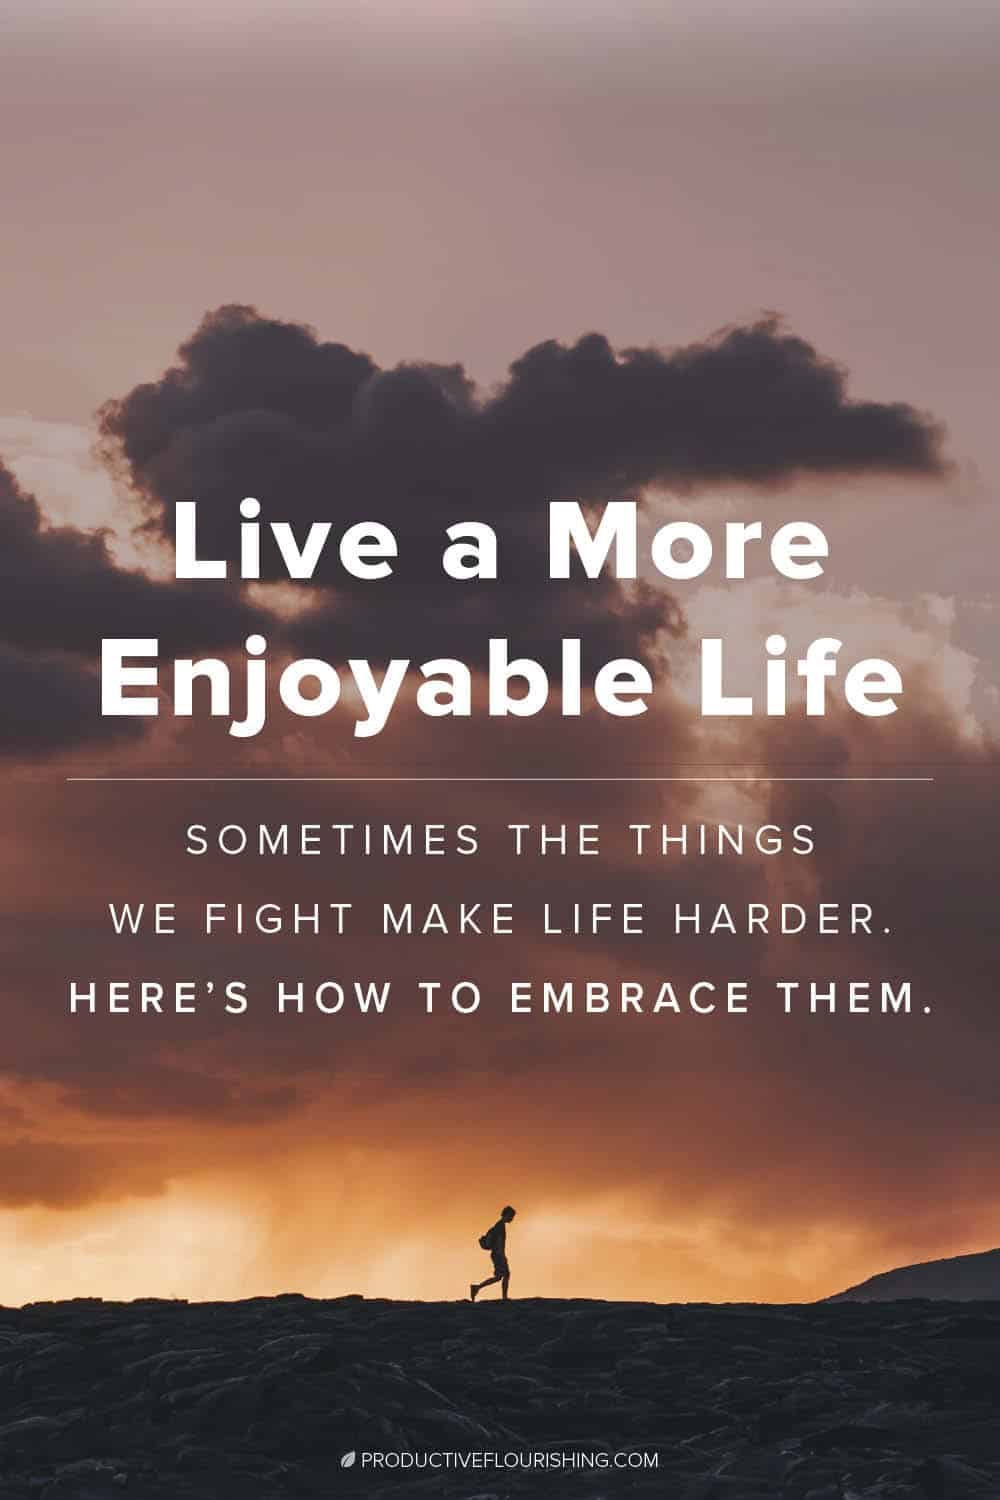 Read about the things that we fight make life harder and how to embrace them. #productiveflourishing #ideallife #healthyrelationships